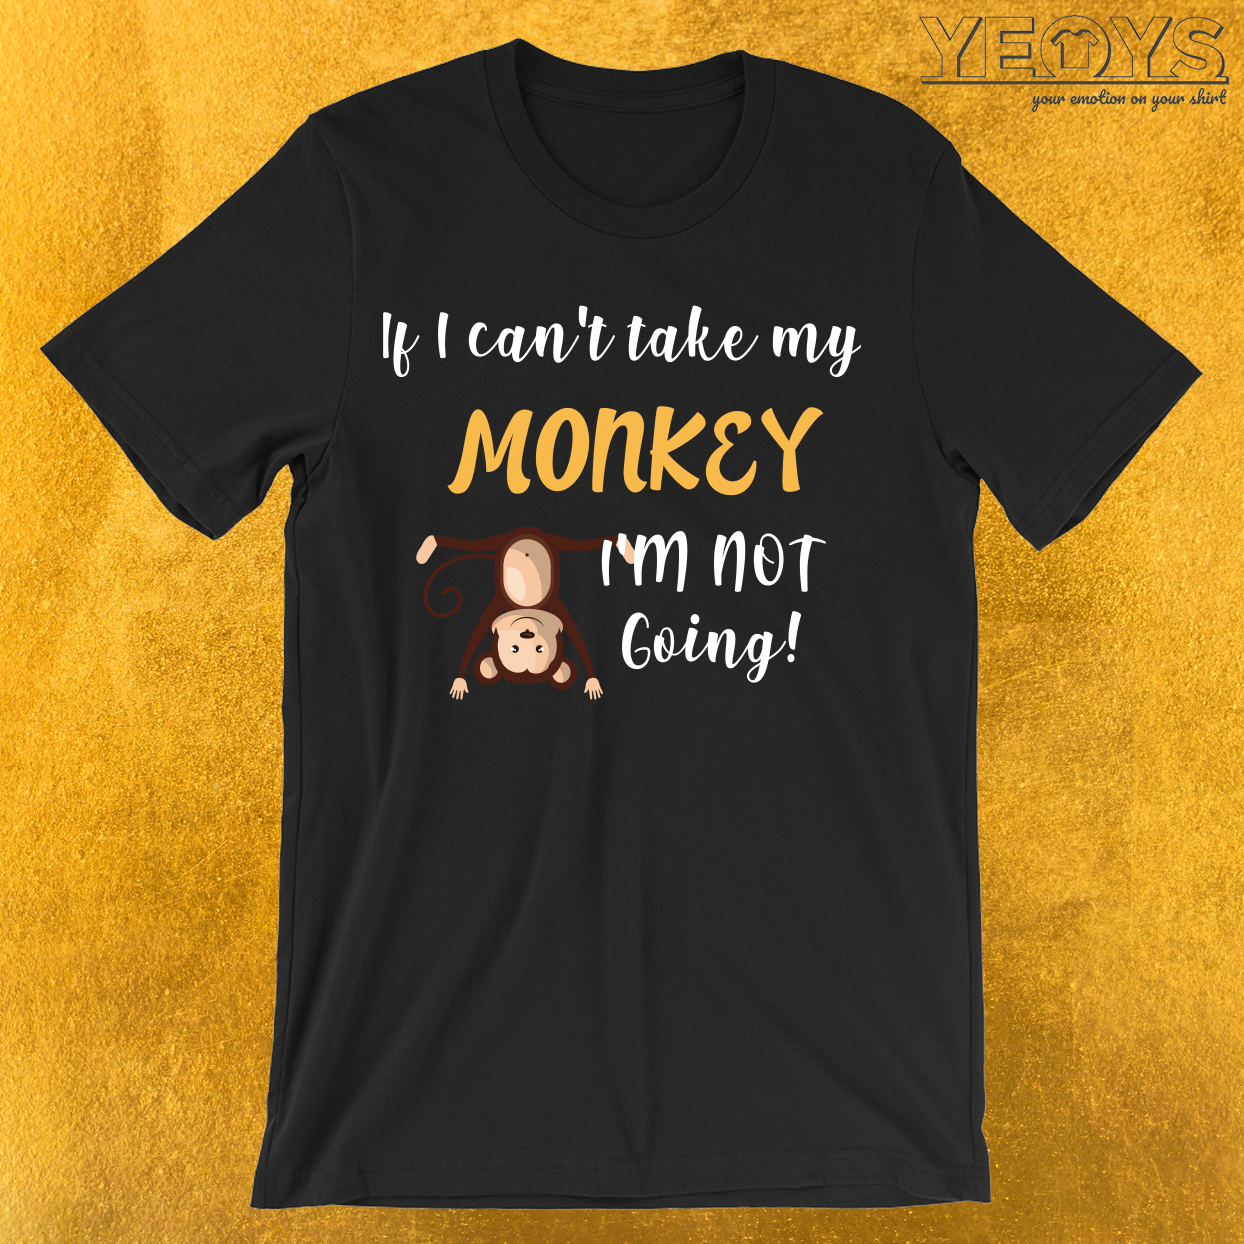 If I Can’t Take My Monkey I’m Not Going T-Shirt